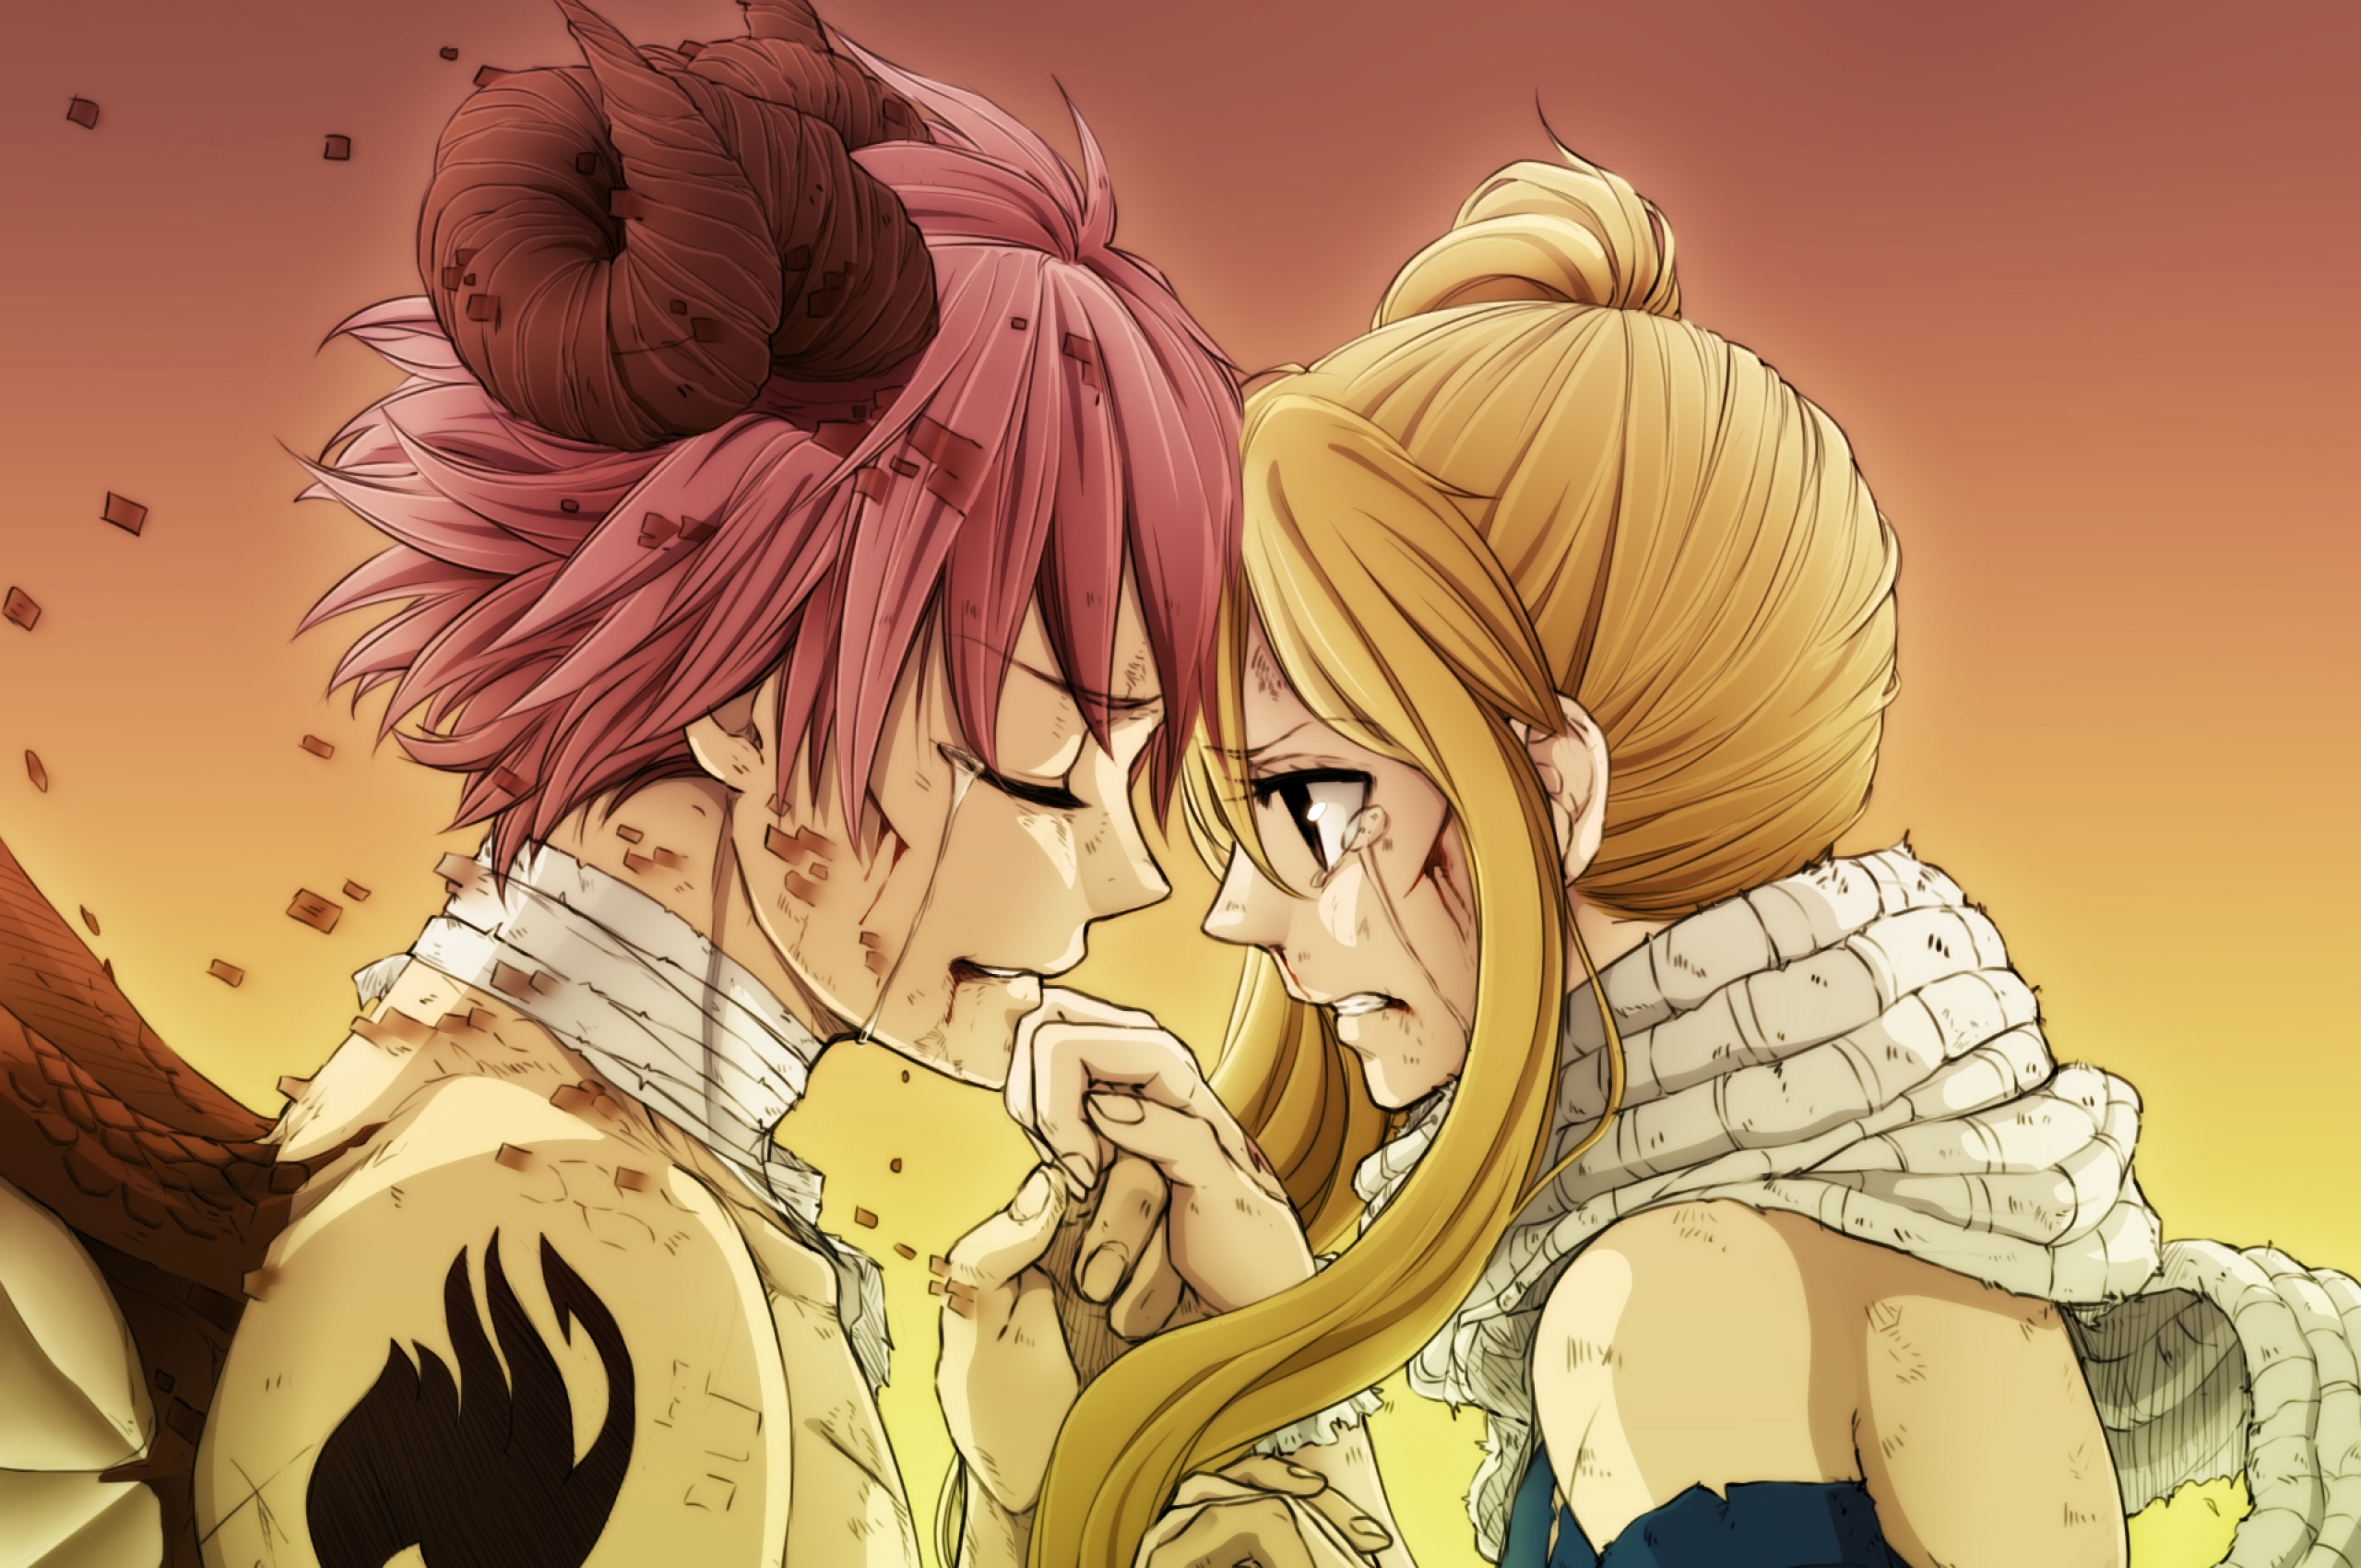 8. "Natsu and Lucy from Fairy Tail" - wide 2